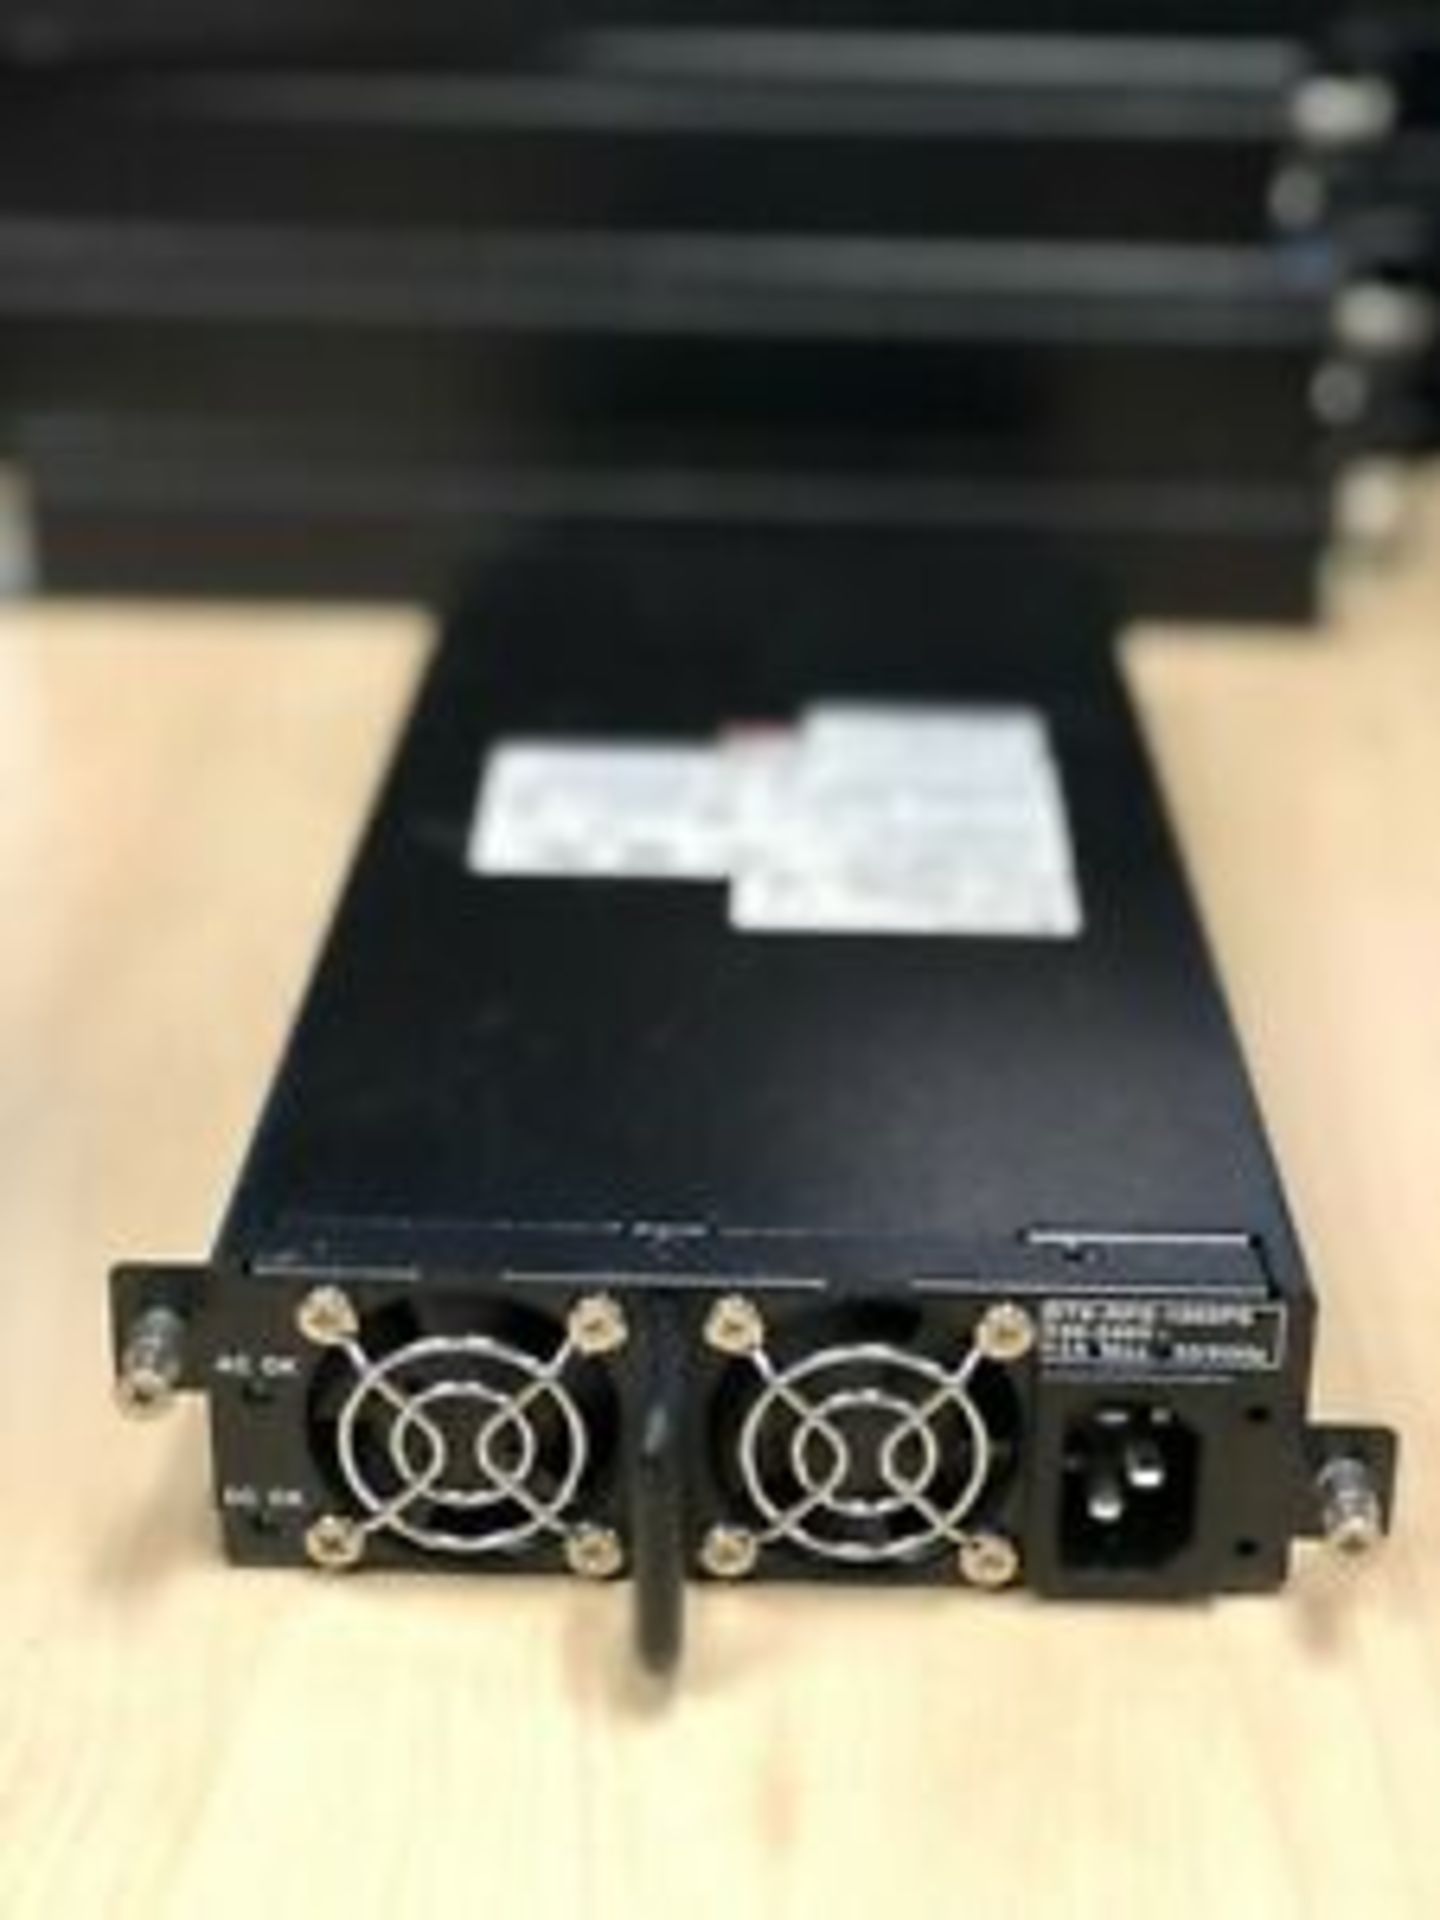 Enterasys STK-RPS-1005PS PoE Power Supply Extreme Networks Artesyn 7001549-J100 - Image 2 of 2